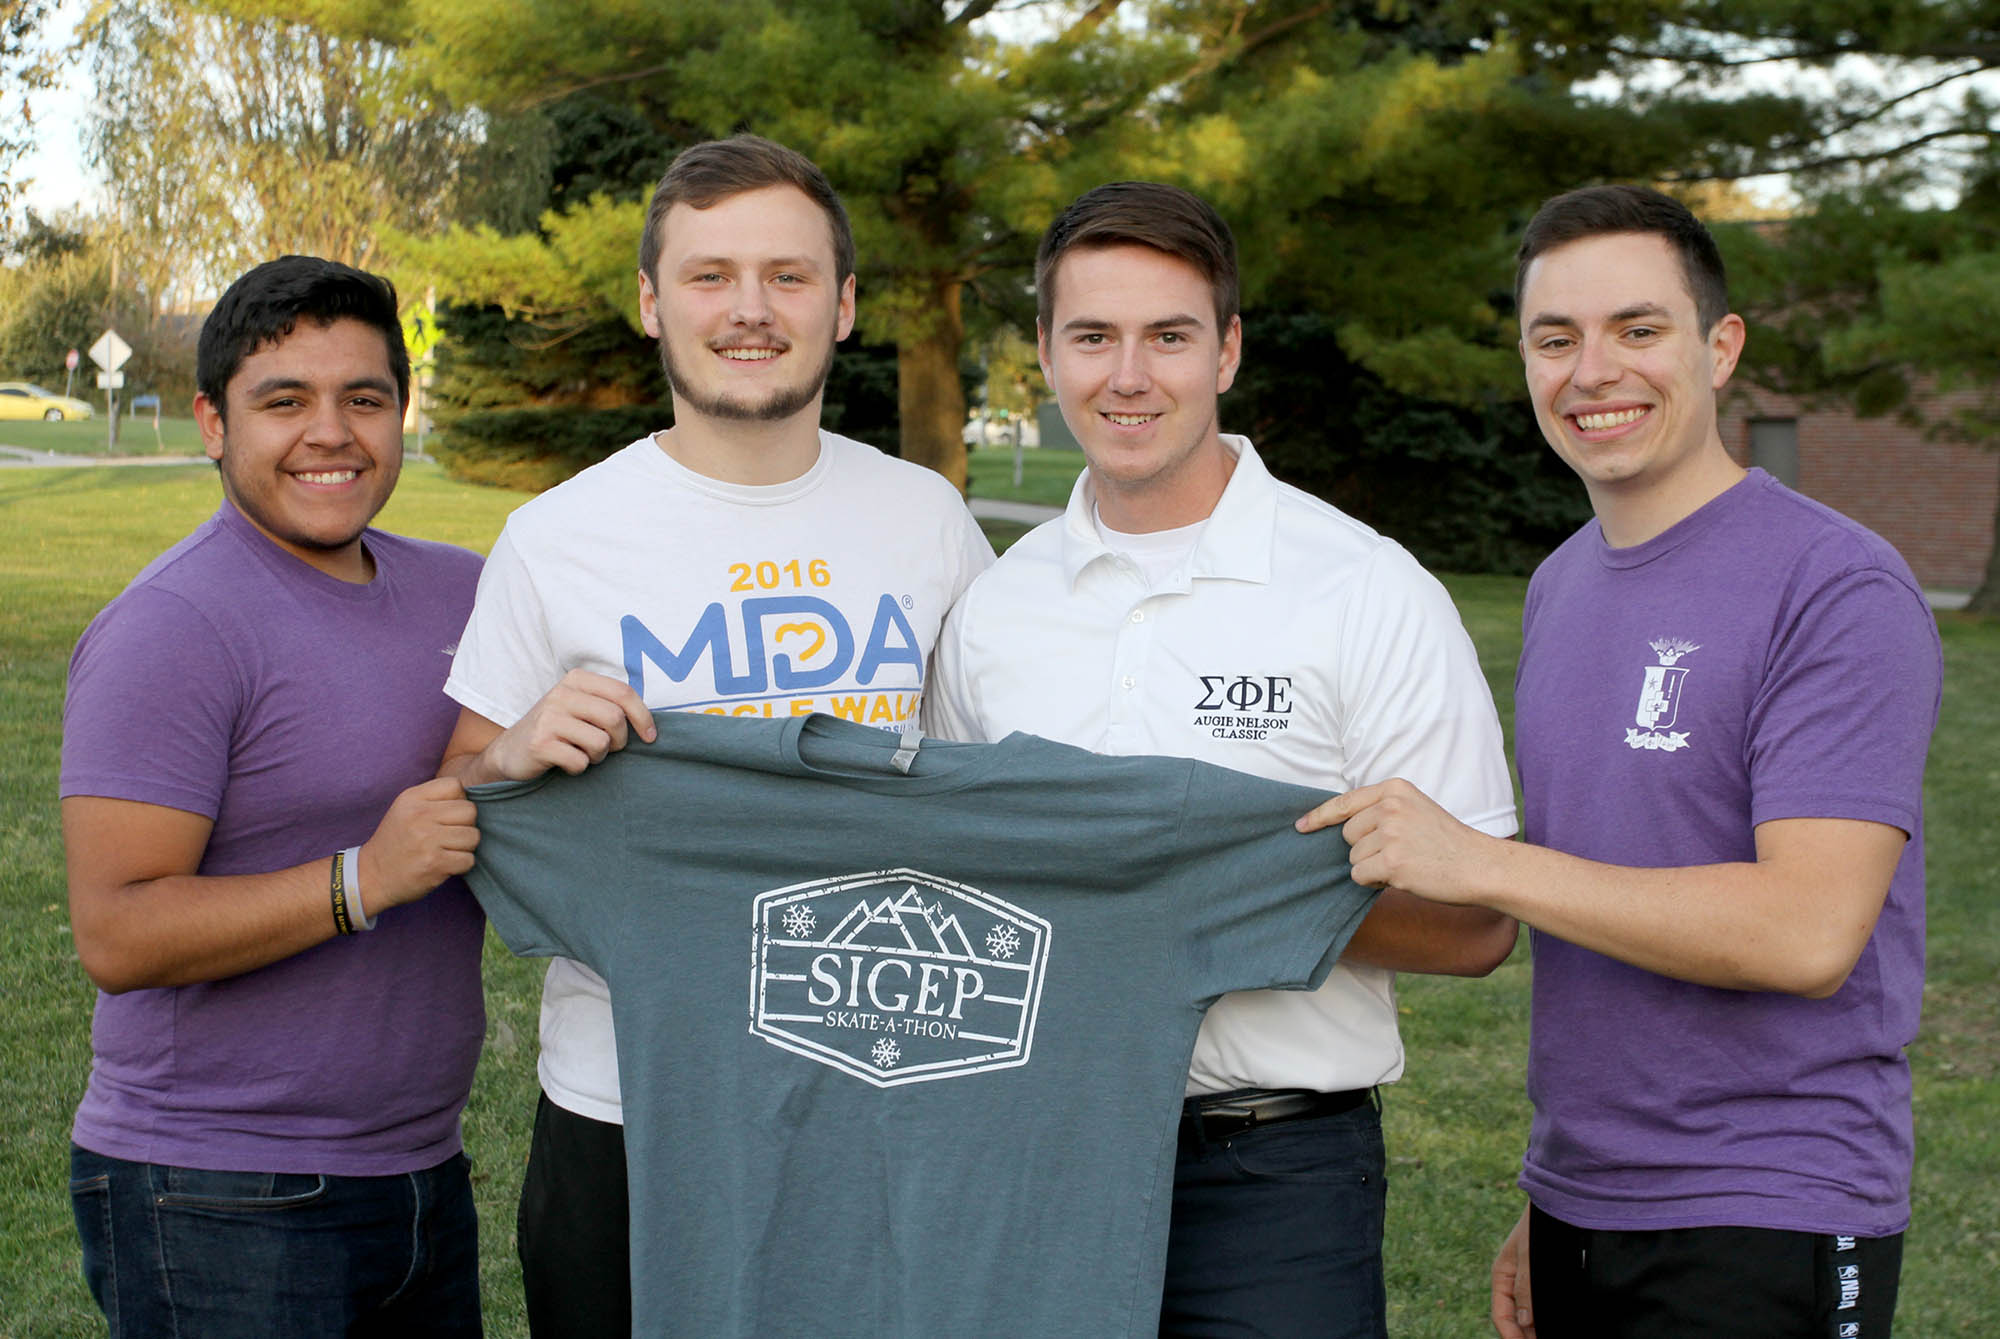 UNK’s Sigma Phi Epsilon fraternity is hosting an MDA Skate and Walk event Sunday at the Viaero Center to raise money for the Muscular Dystrophy Association and its Nebraska summer camp. Pictured, from left, are fraternity members Agustin Ruvalcaba, Jared Hunke, Corey Johnson and Austin Jacobsen. (Photo by Tyler Ellyson, UNK Communications)